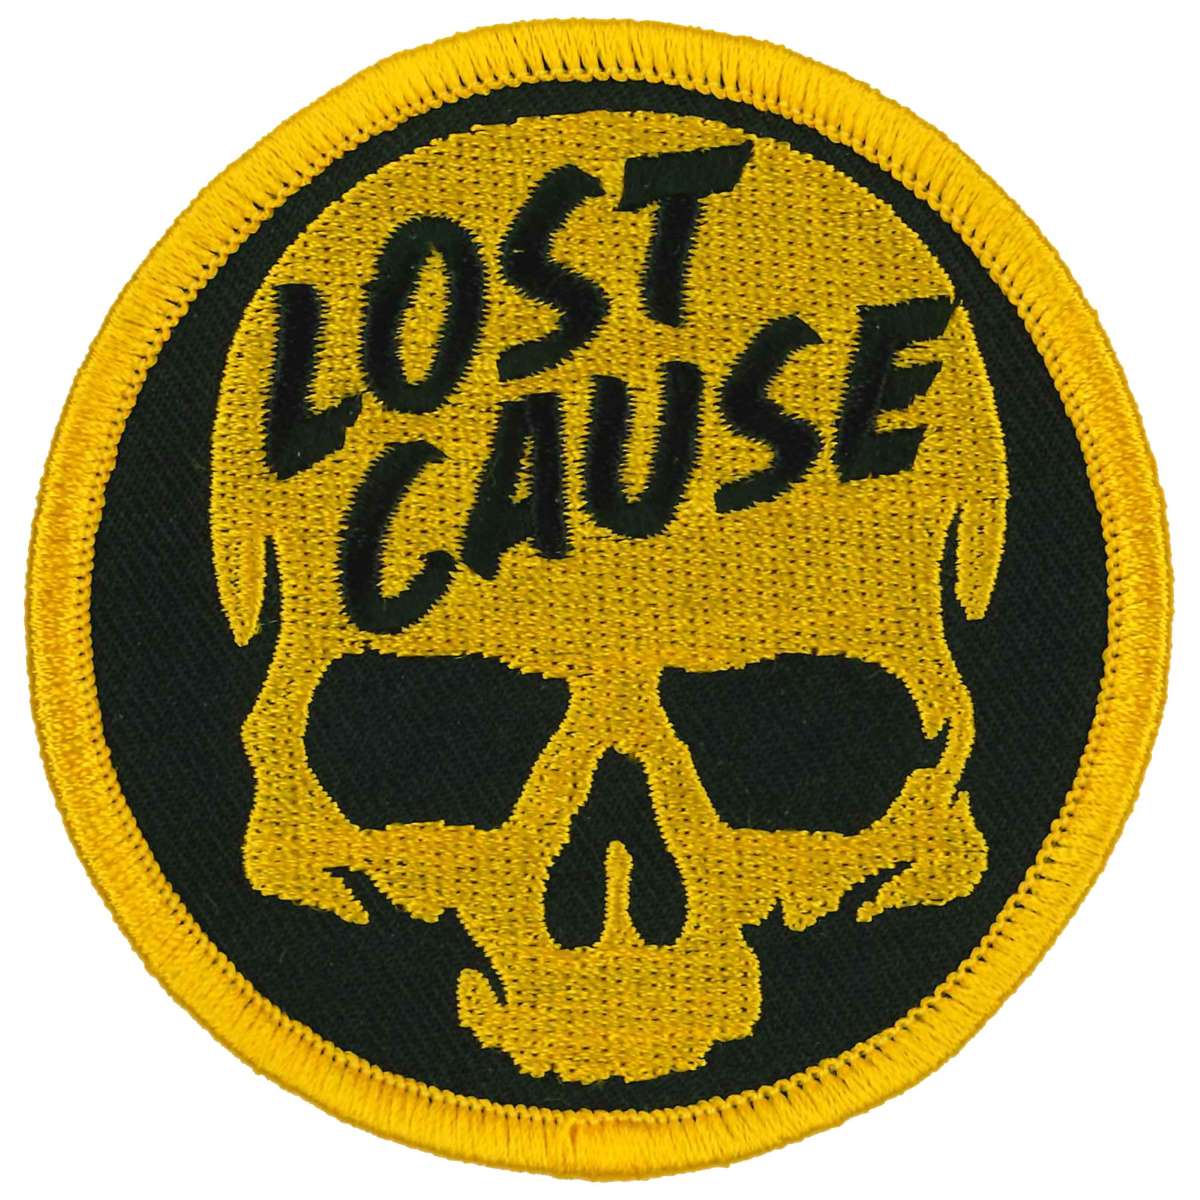 Hot Leathers Lost Cause 3" X 3" Patch PPL9893